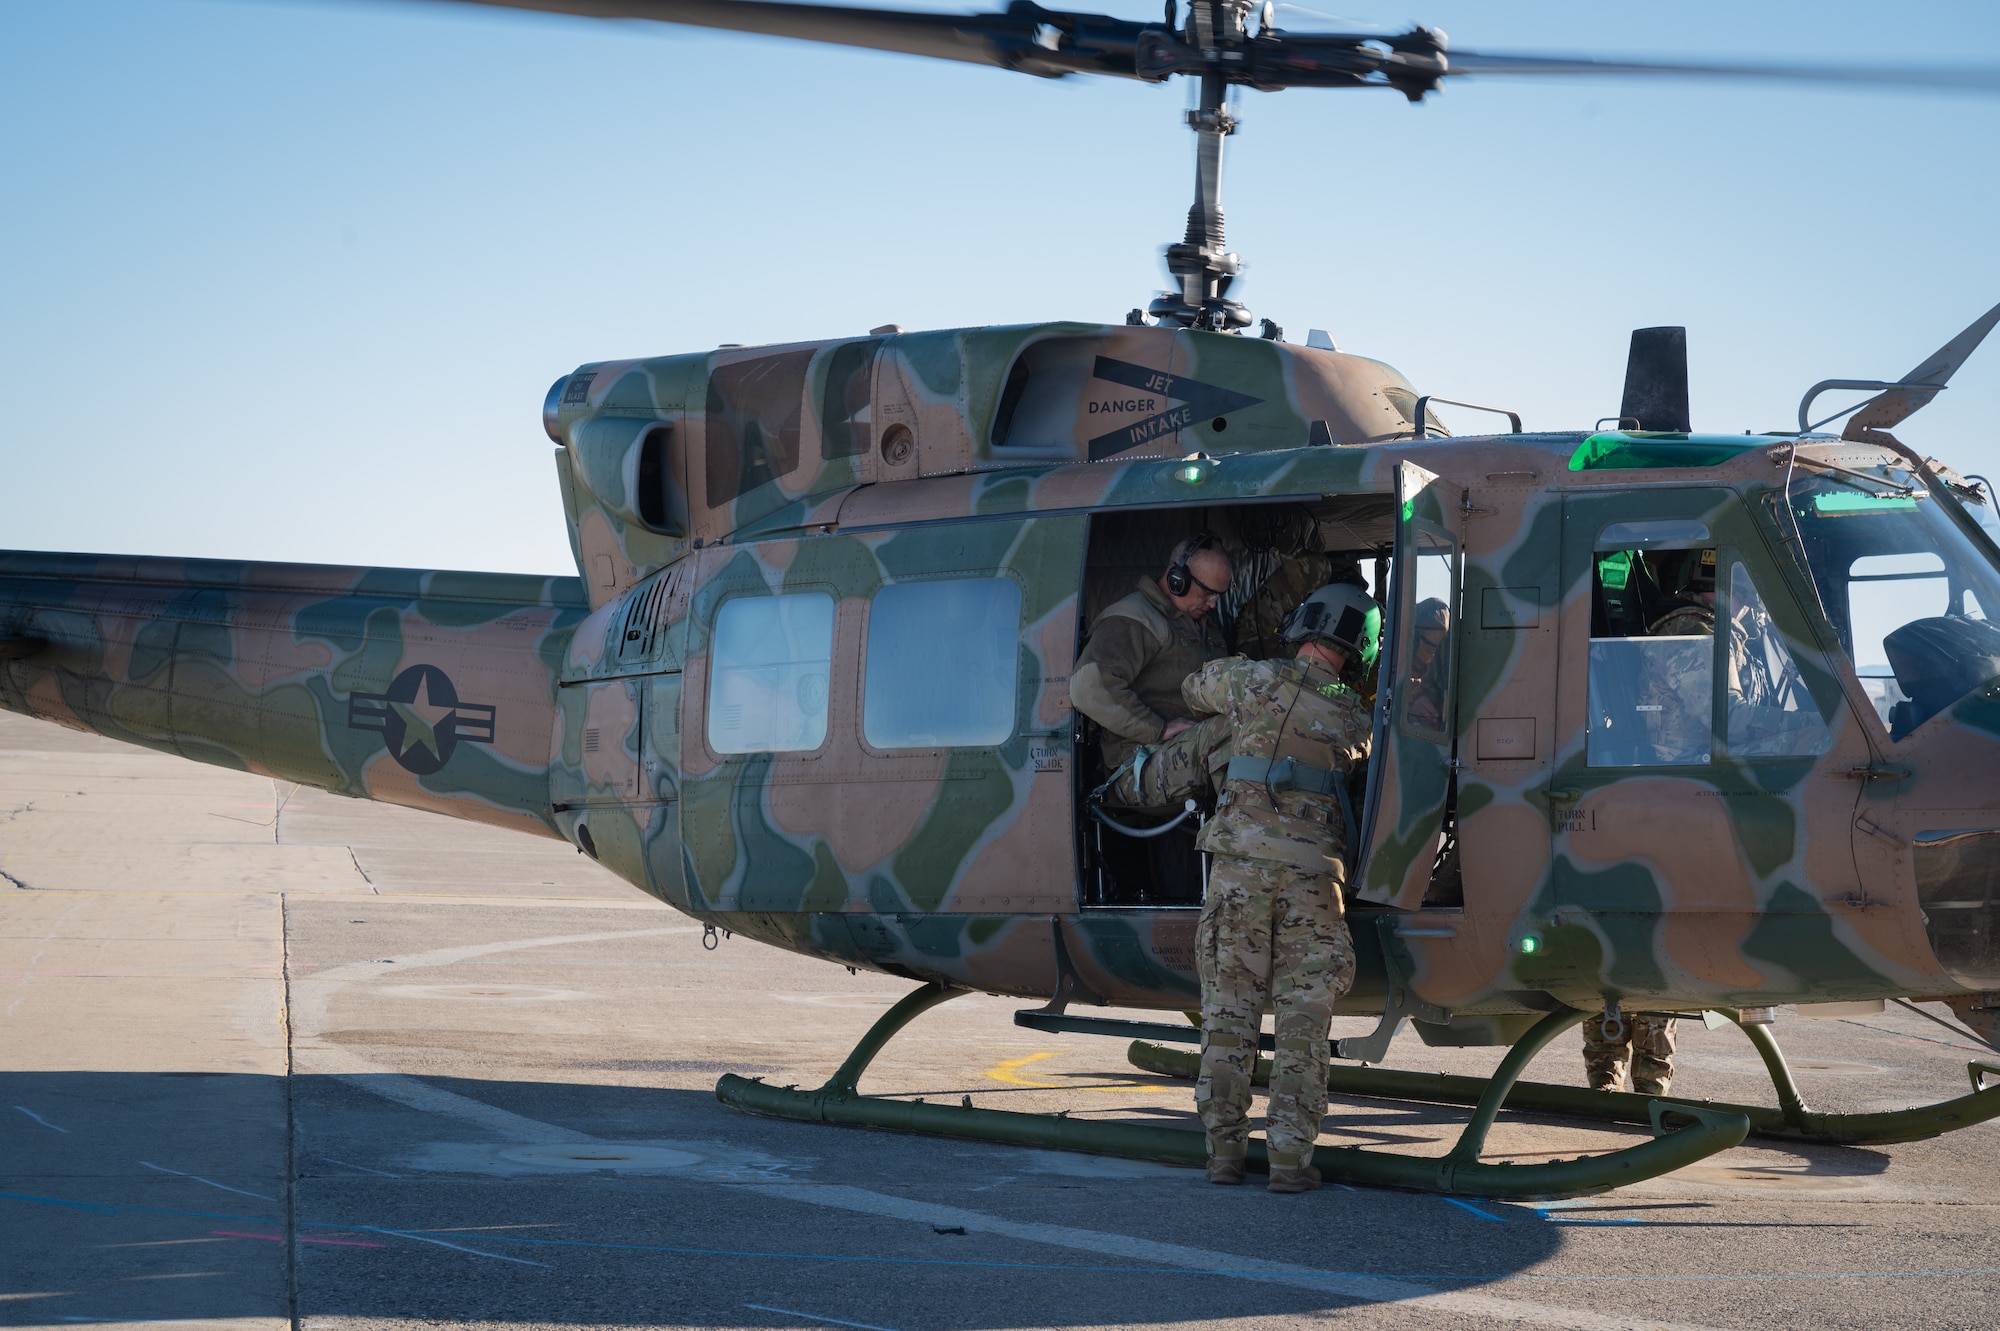 Two people in military uniform prepare for flight takeoff on a camouflage-painted helicopter.